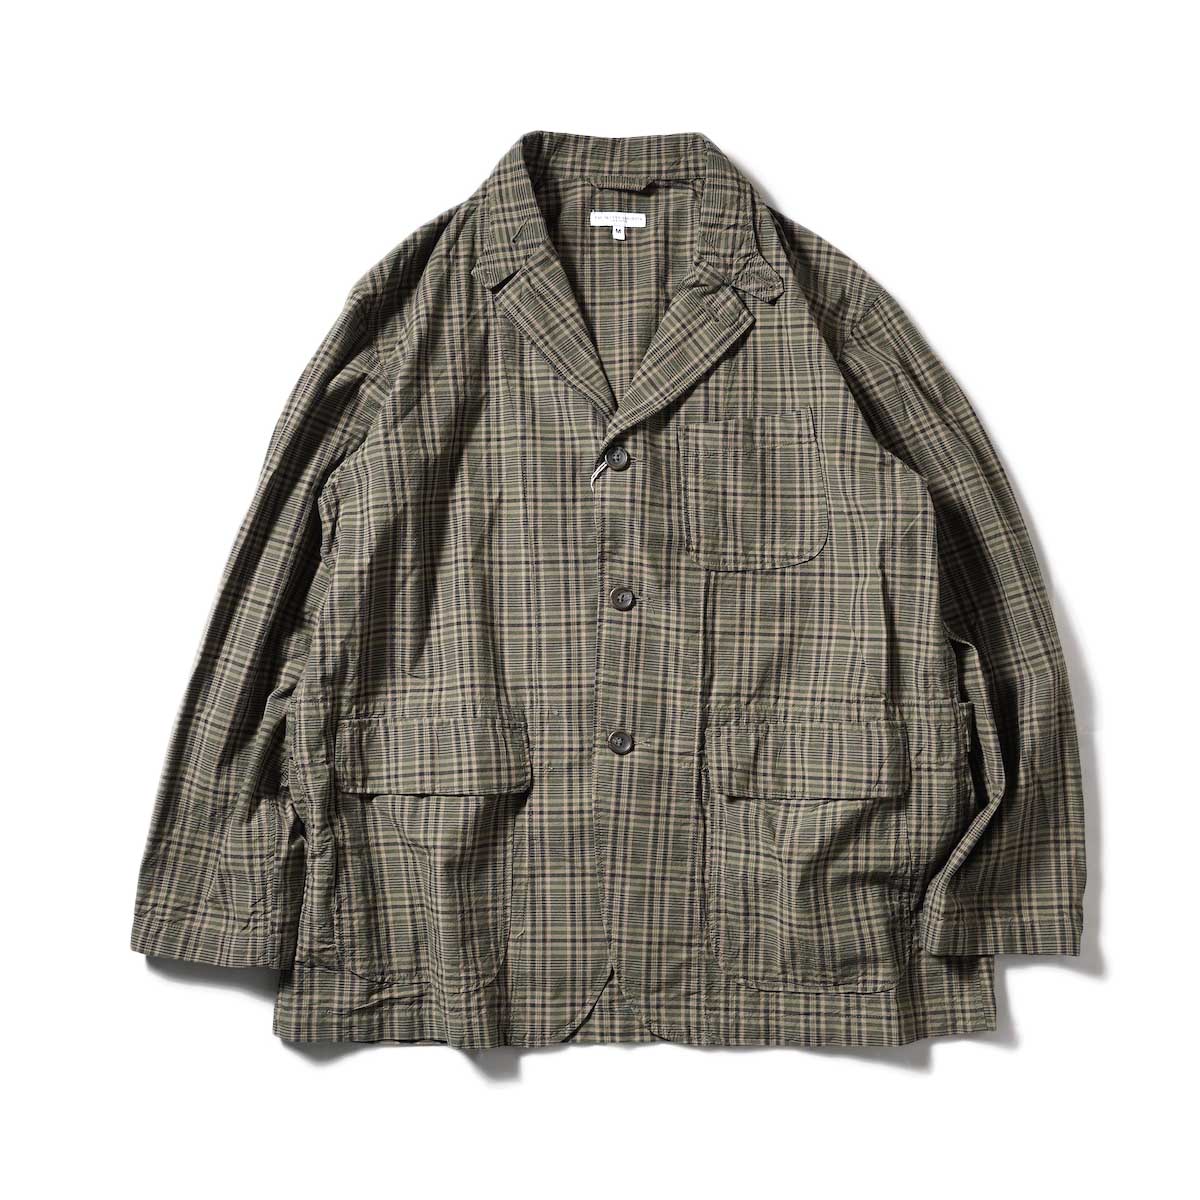 Engineered Garments / Loiter Jacket - Cotton Madras Check (Olive/Brown)正面